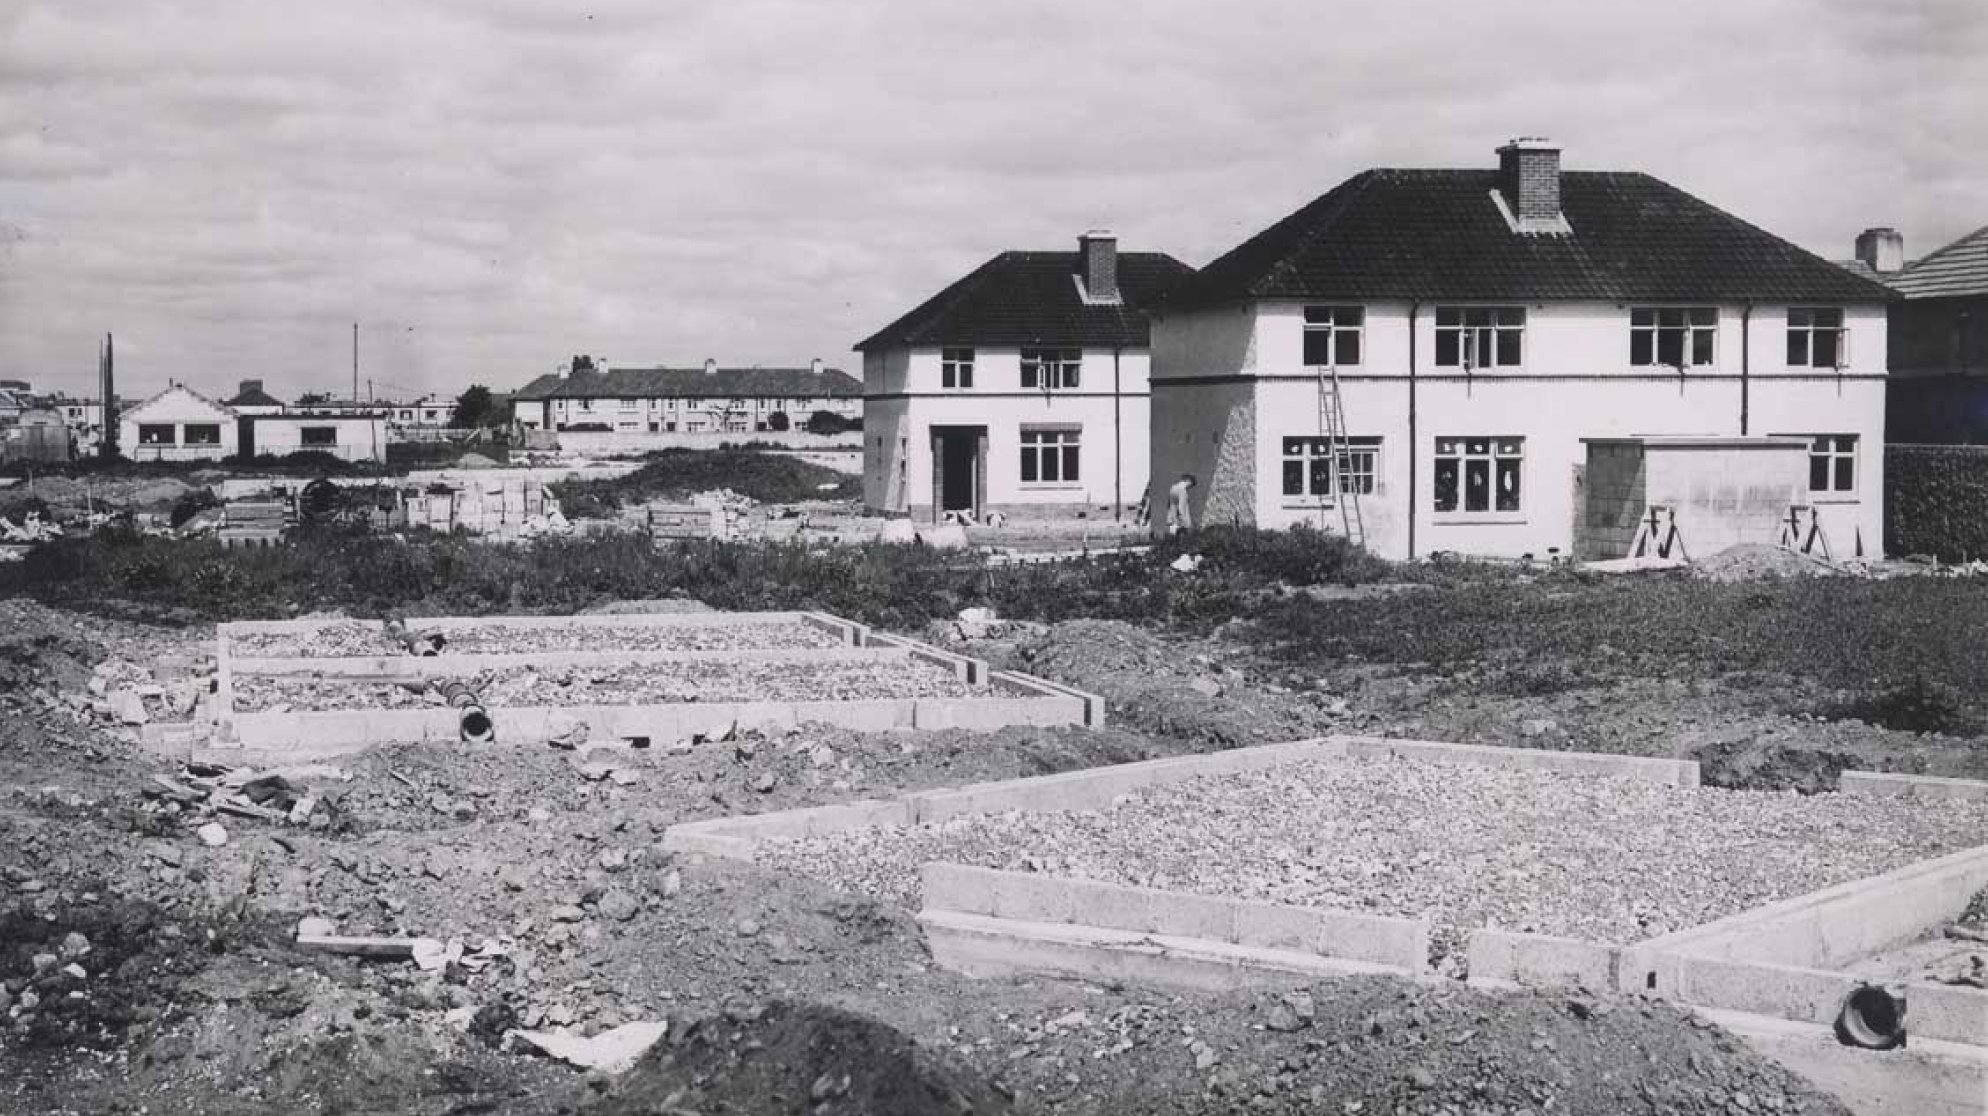 Black and white photograph of a house under construction in the Terenure housing estate, 1949